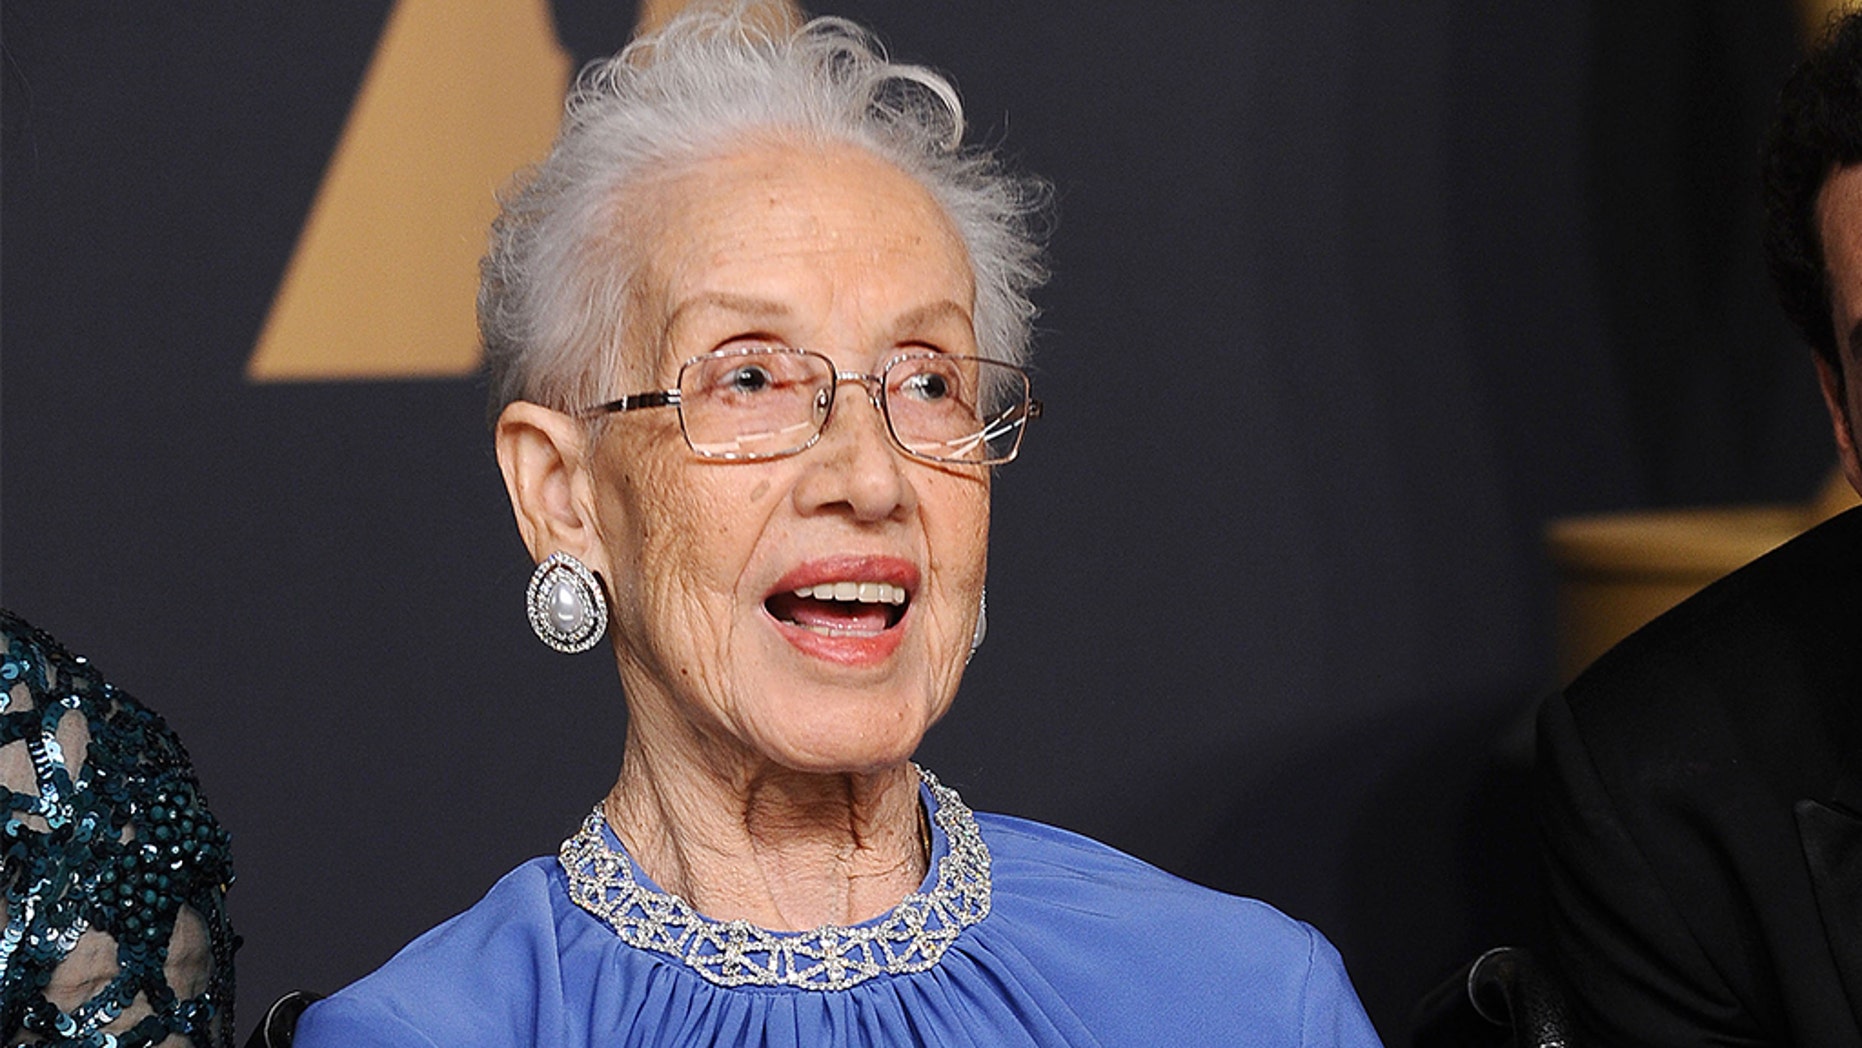 NASA renamed its Independent Verification and Validation Facility in West Virginia in honor of Katherine Johnson.